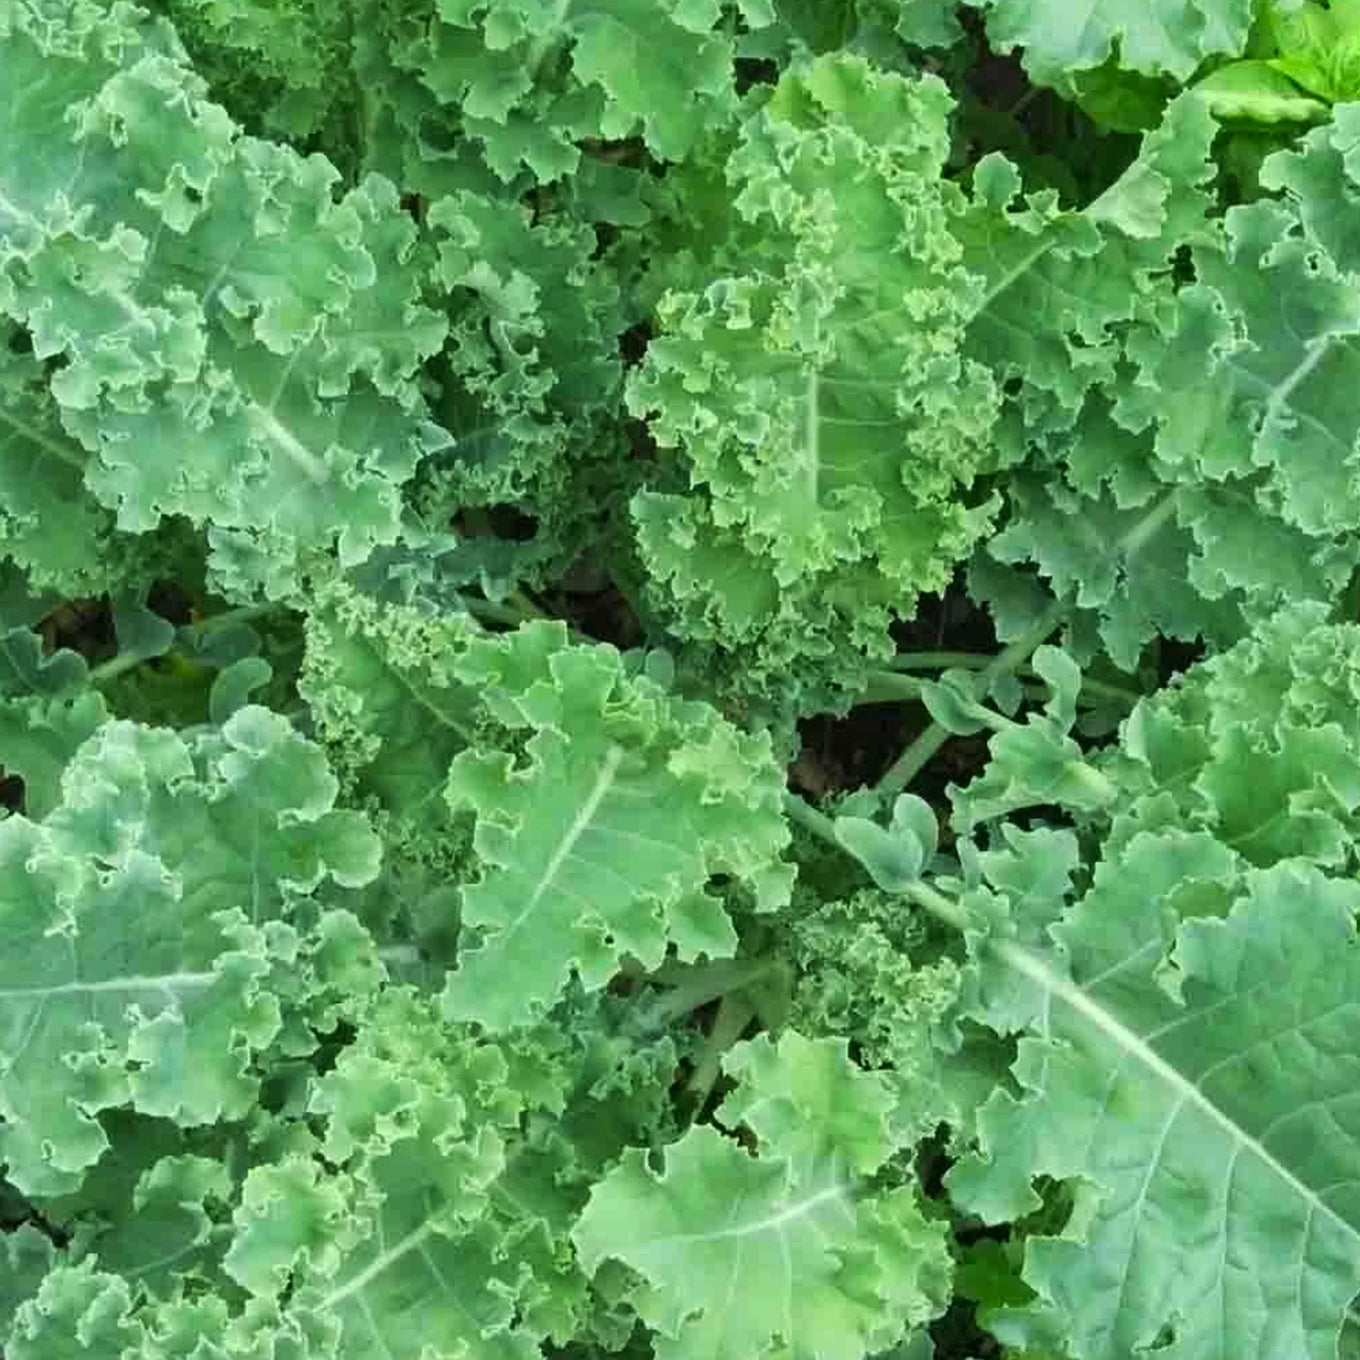 Blue Scotch Kale Plant fully grown and ready for harvesting